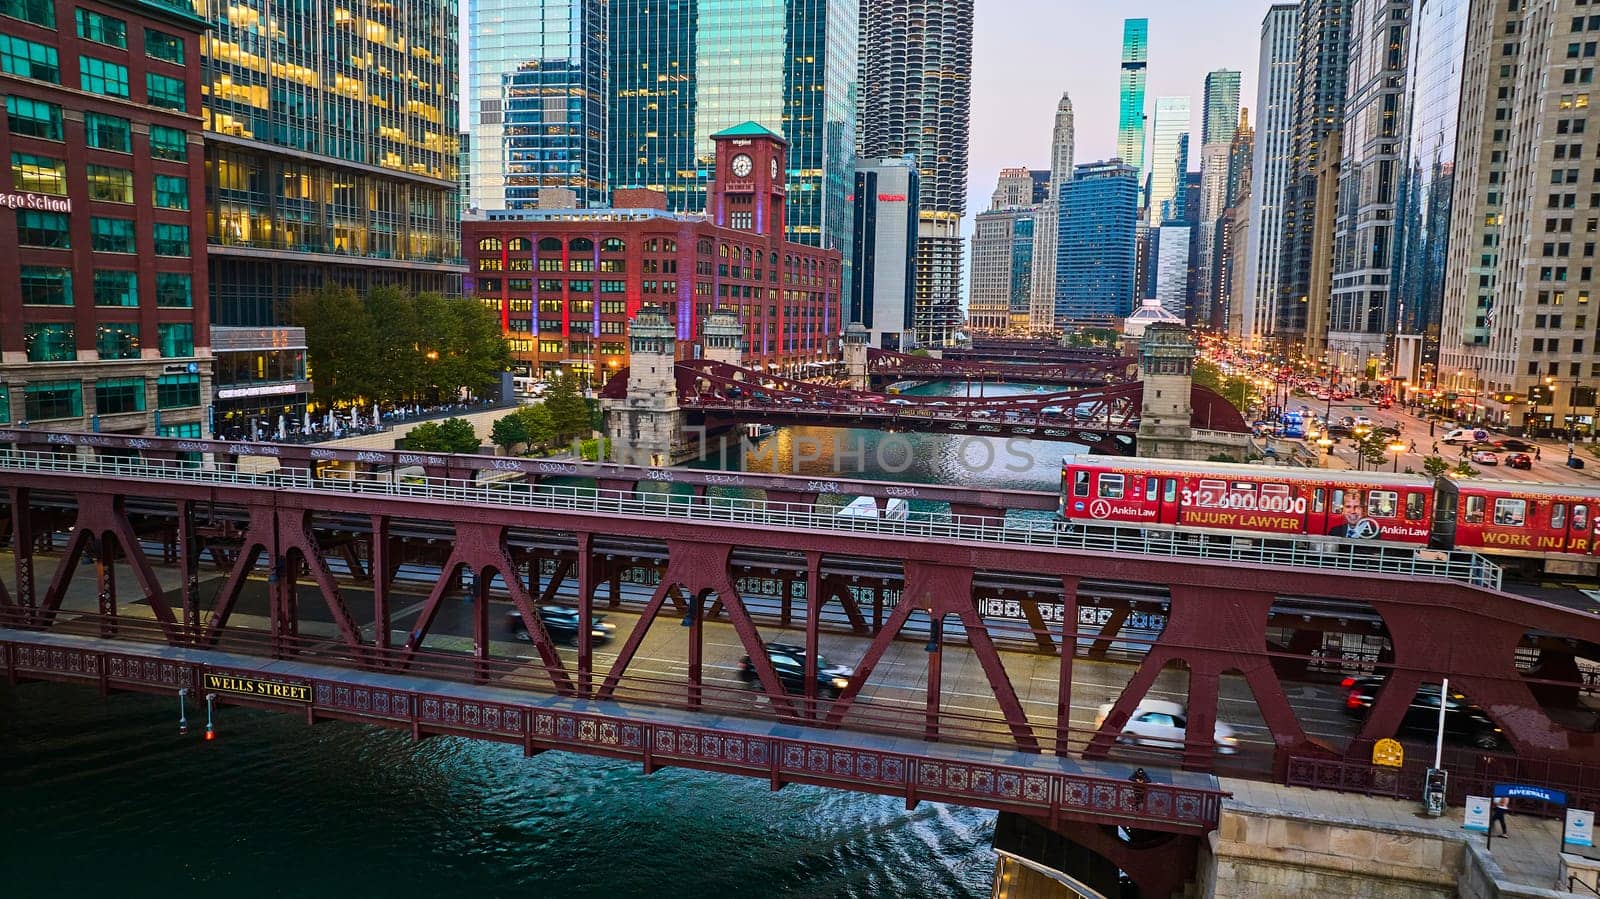 Chicago bridges over canal aerial with city lights and skyscraper buildings in downtown, tourism by njproductions